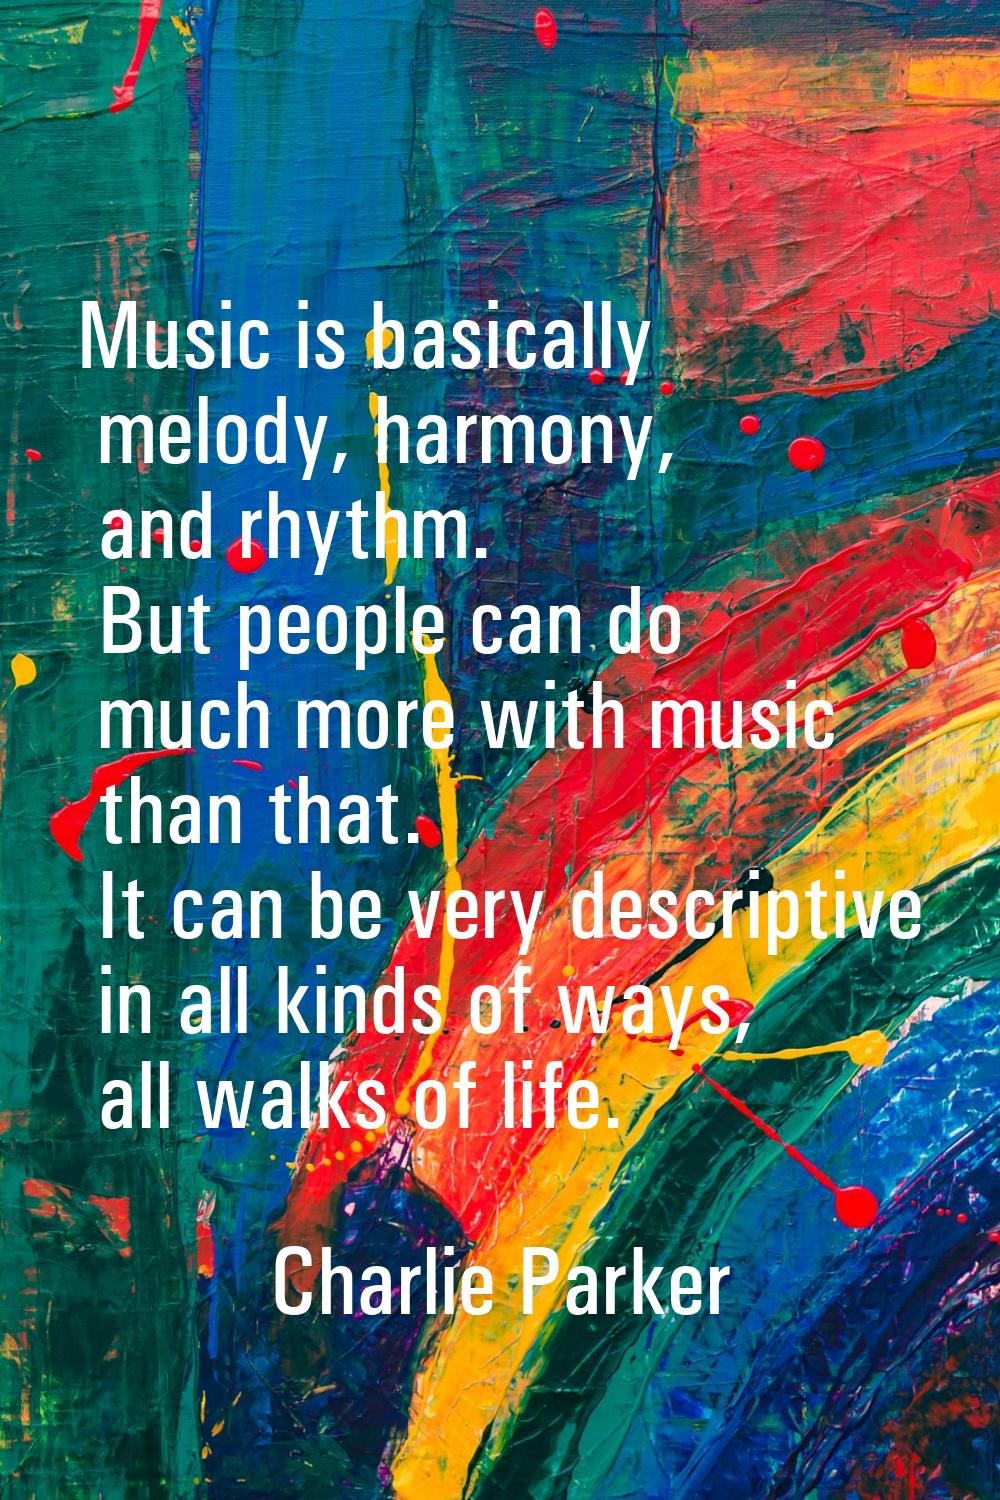 Music is basically melody, harmony, and rhythm. But people can do much more with music than that. I